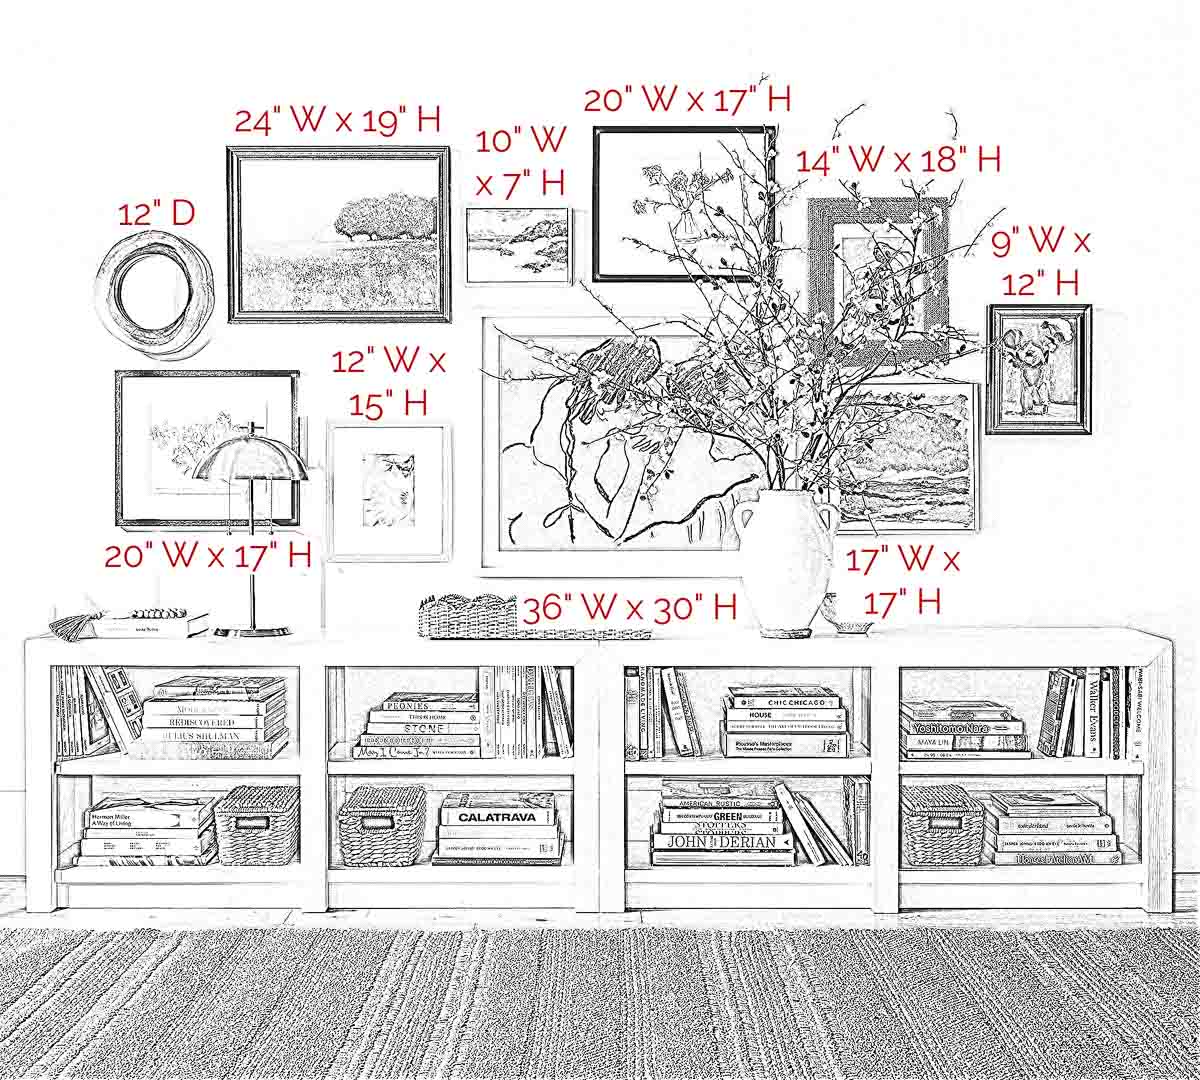 Gallery Wall layout of art over living room console